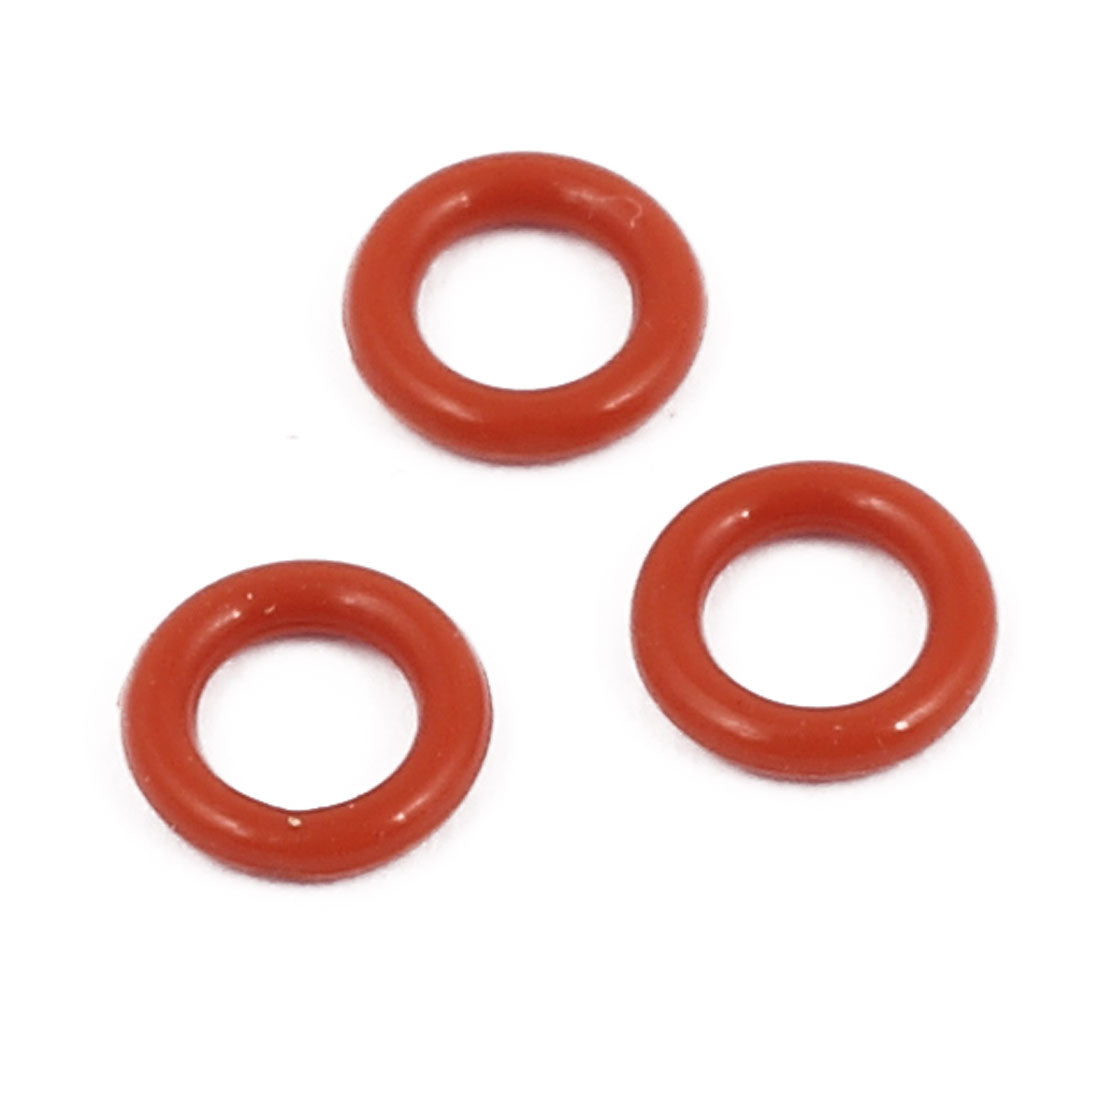 uxcell Uxcell 50Pcs 5mm x 1mm Rubber O-rings NBR Heat Resistant Sealing Ring Grommets Red